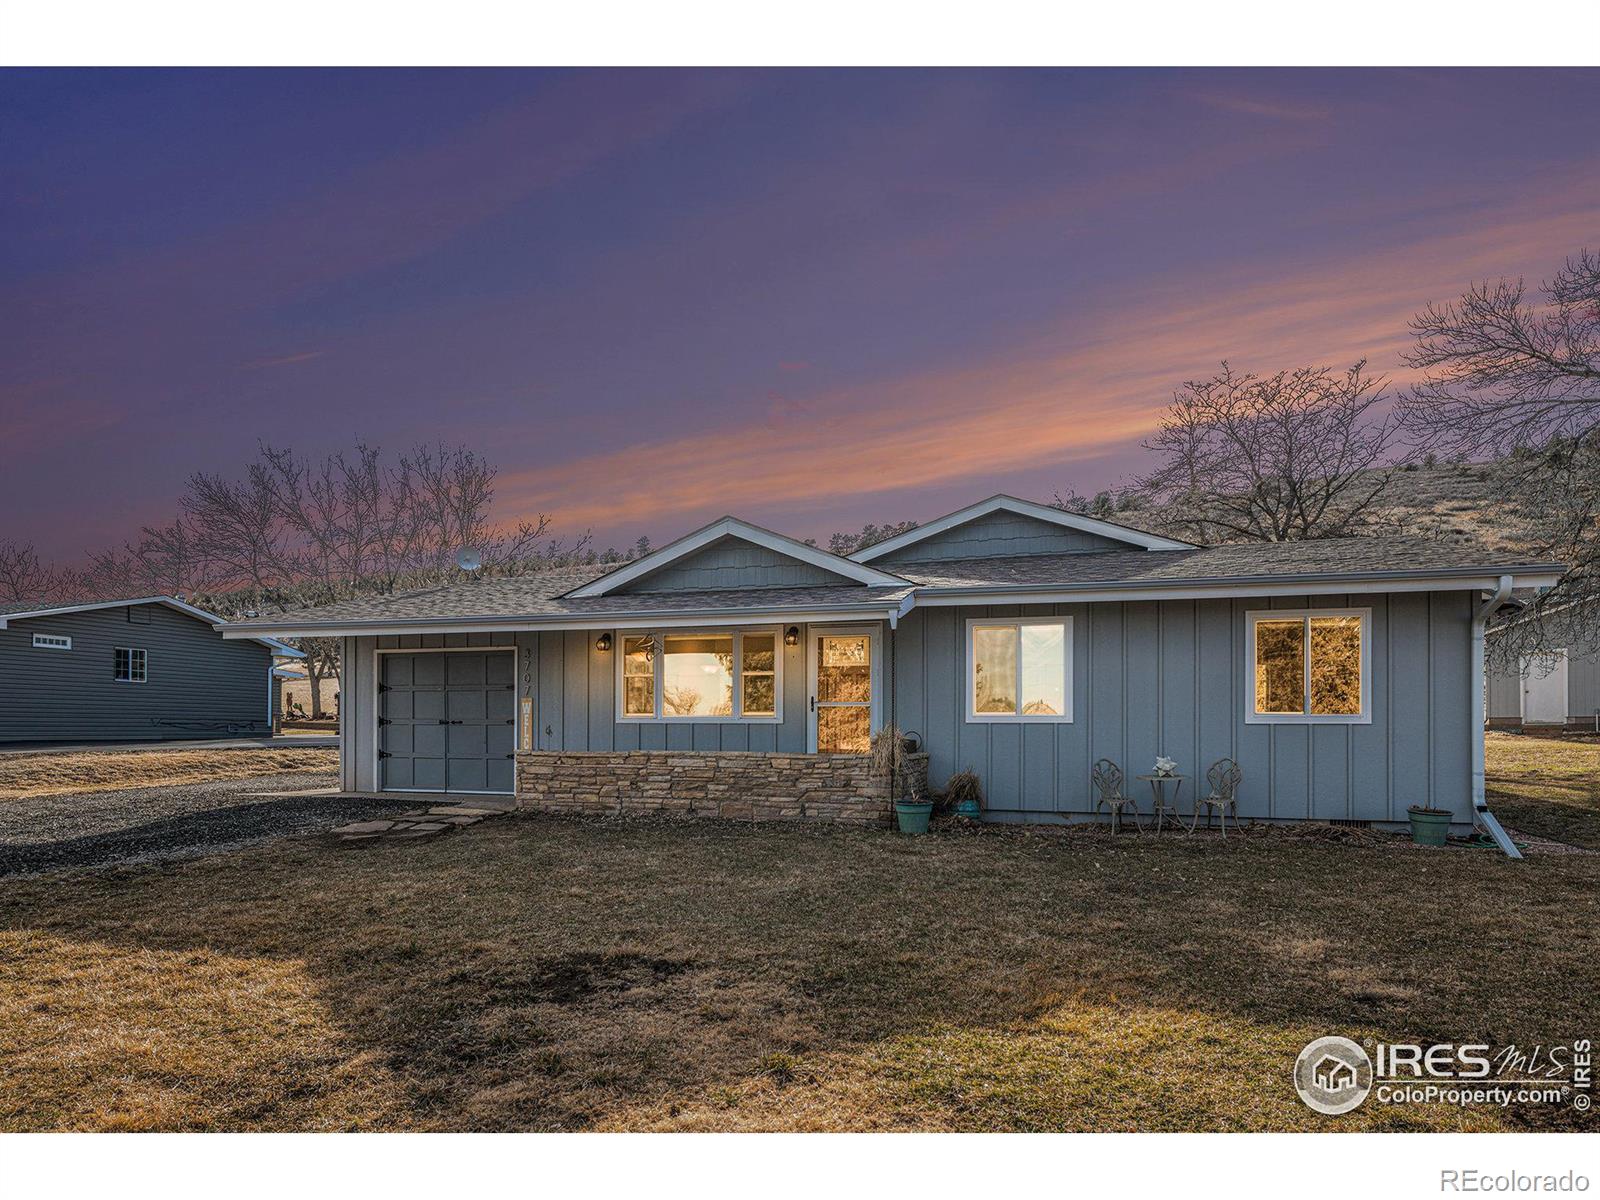 3707 n county road 27 , loveland sold home. Closed on 2024-05-15 for $635,000.